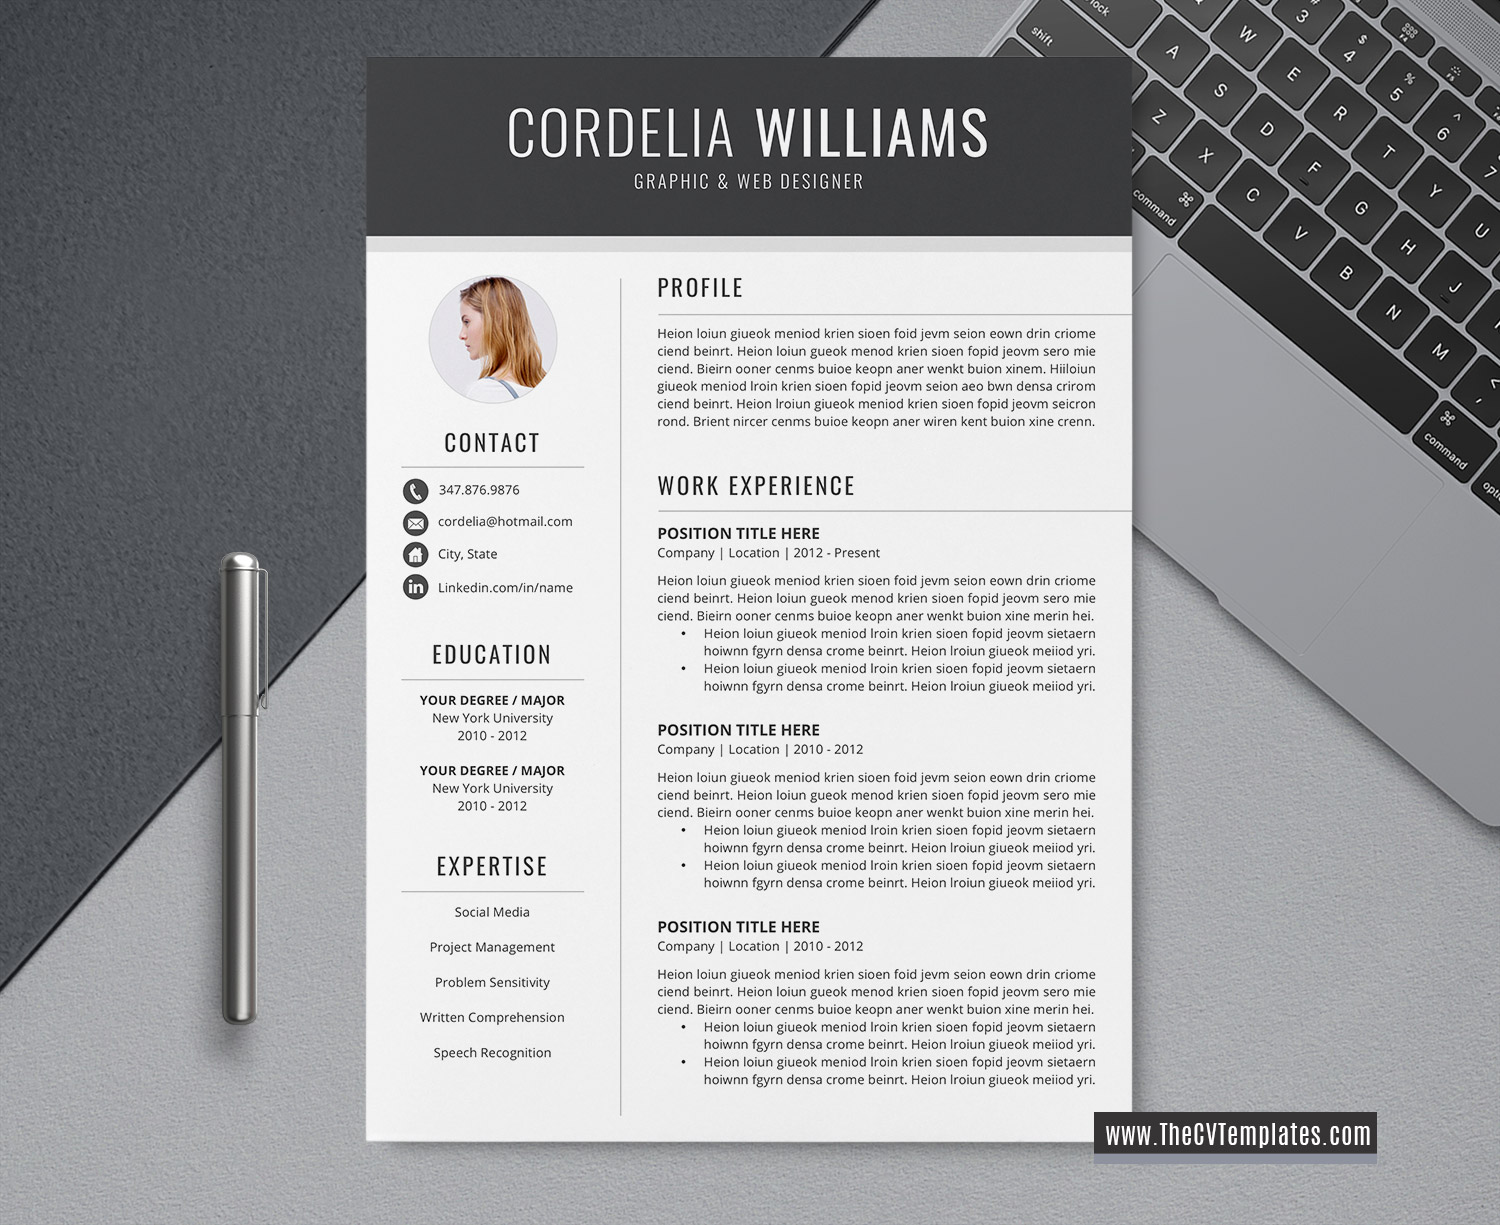 Office Resume Template from www.thecvtemplates.com